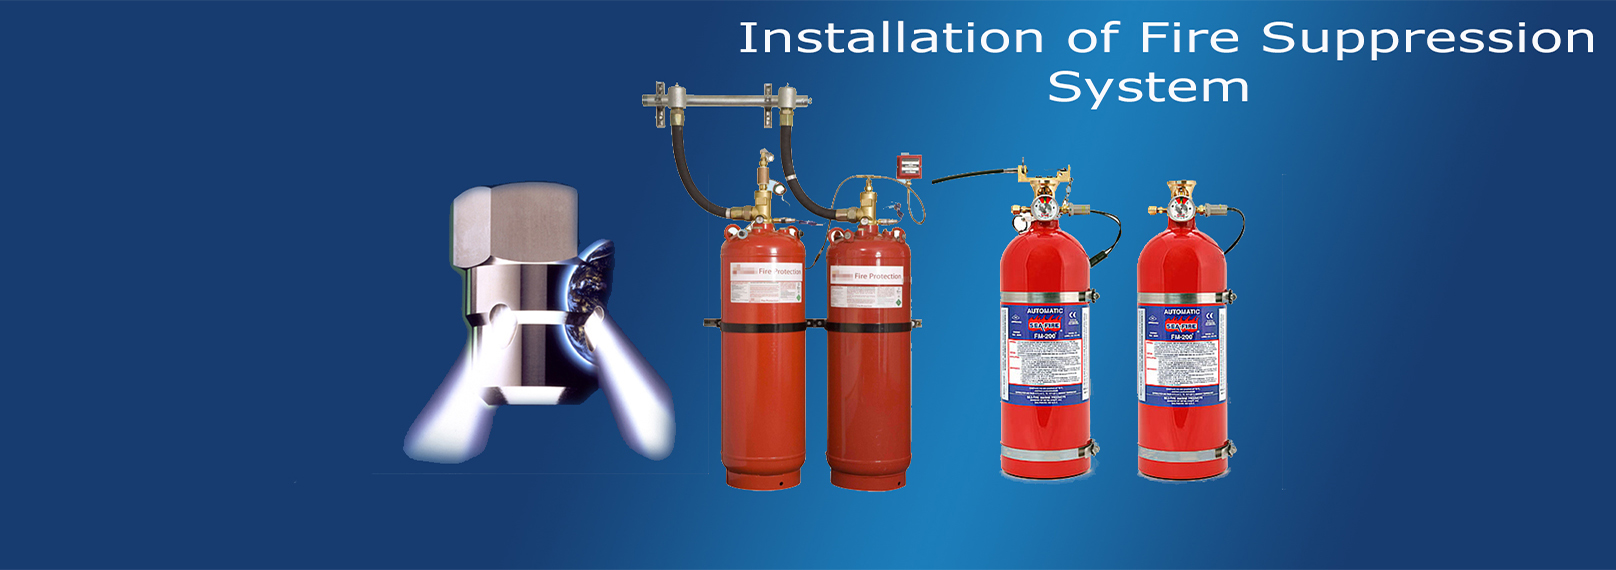  RPS Fire Suppression System